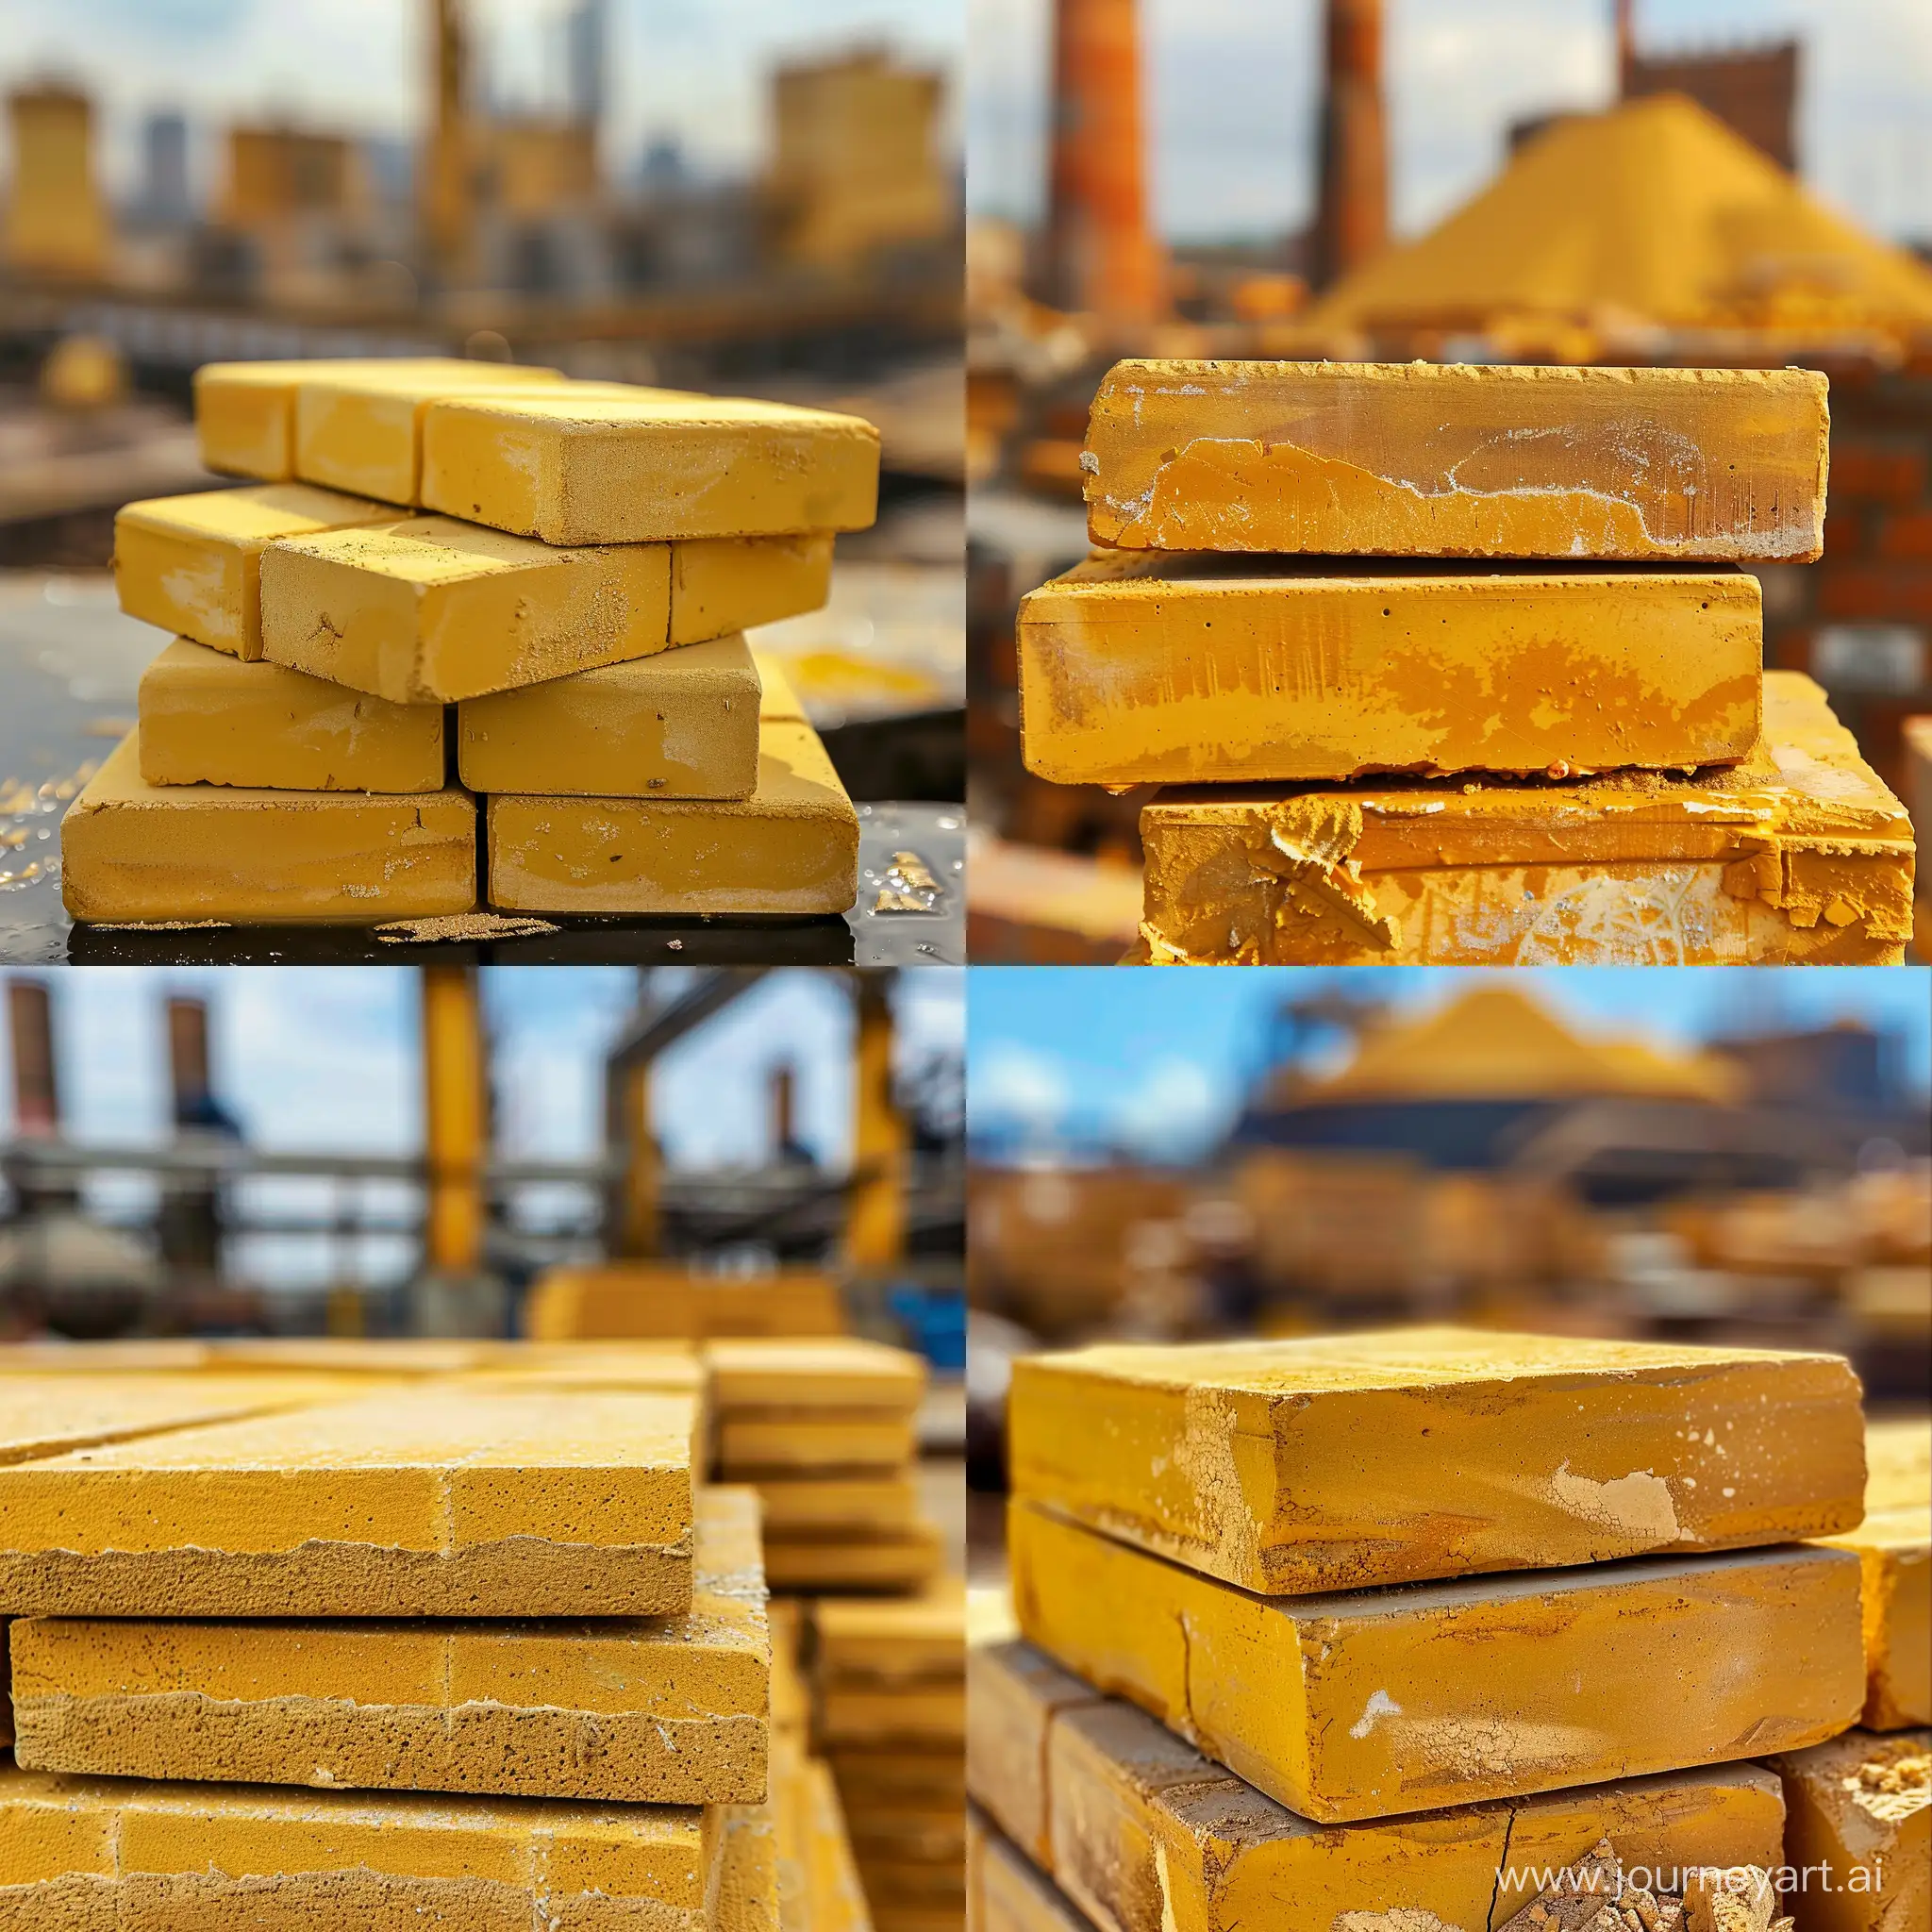 CloseUp-Photo-of-Stacked-Yellow-Bricks-with-Blurred-Brick-Factory-Background